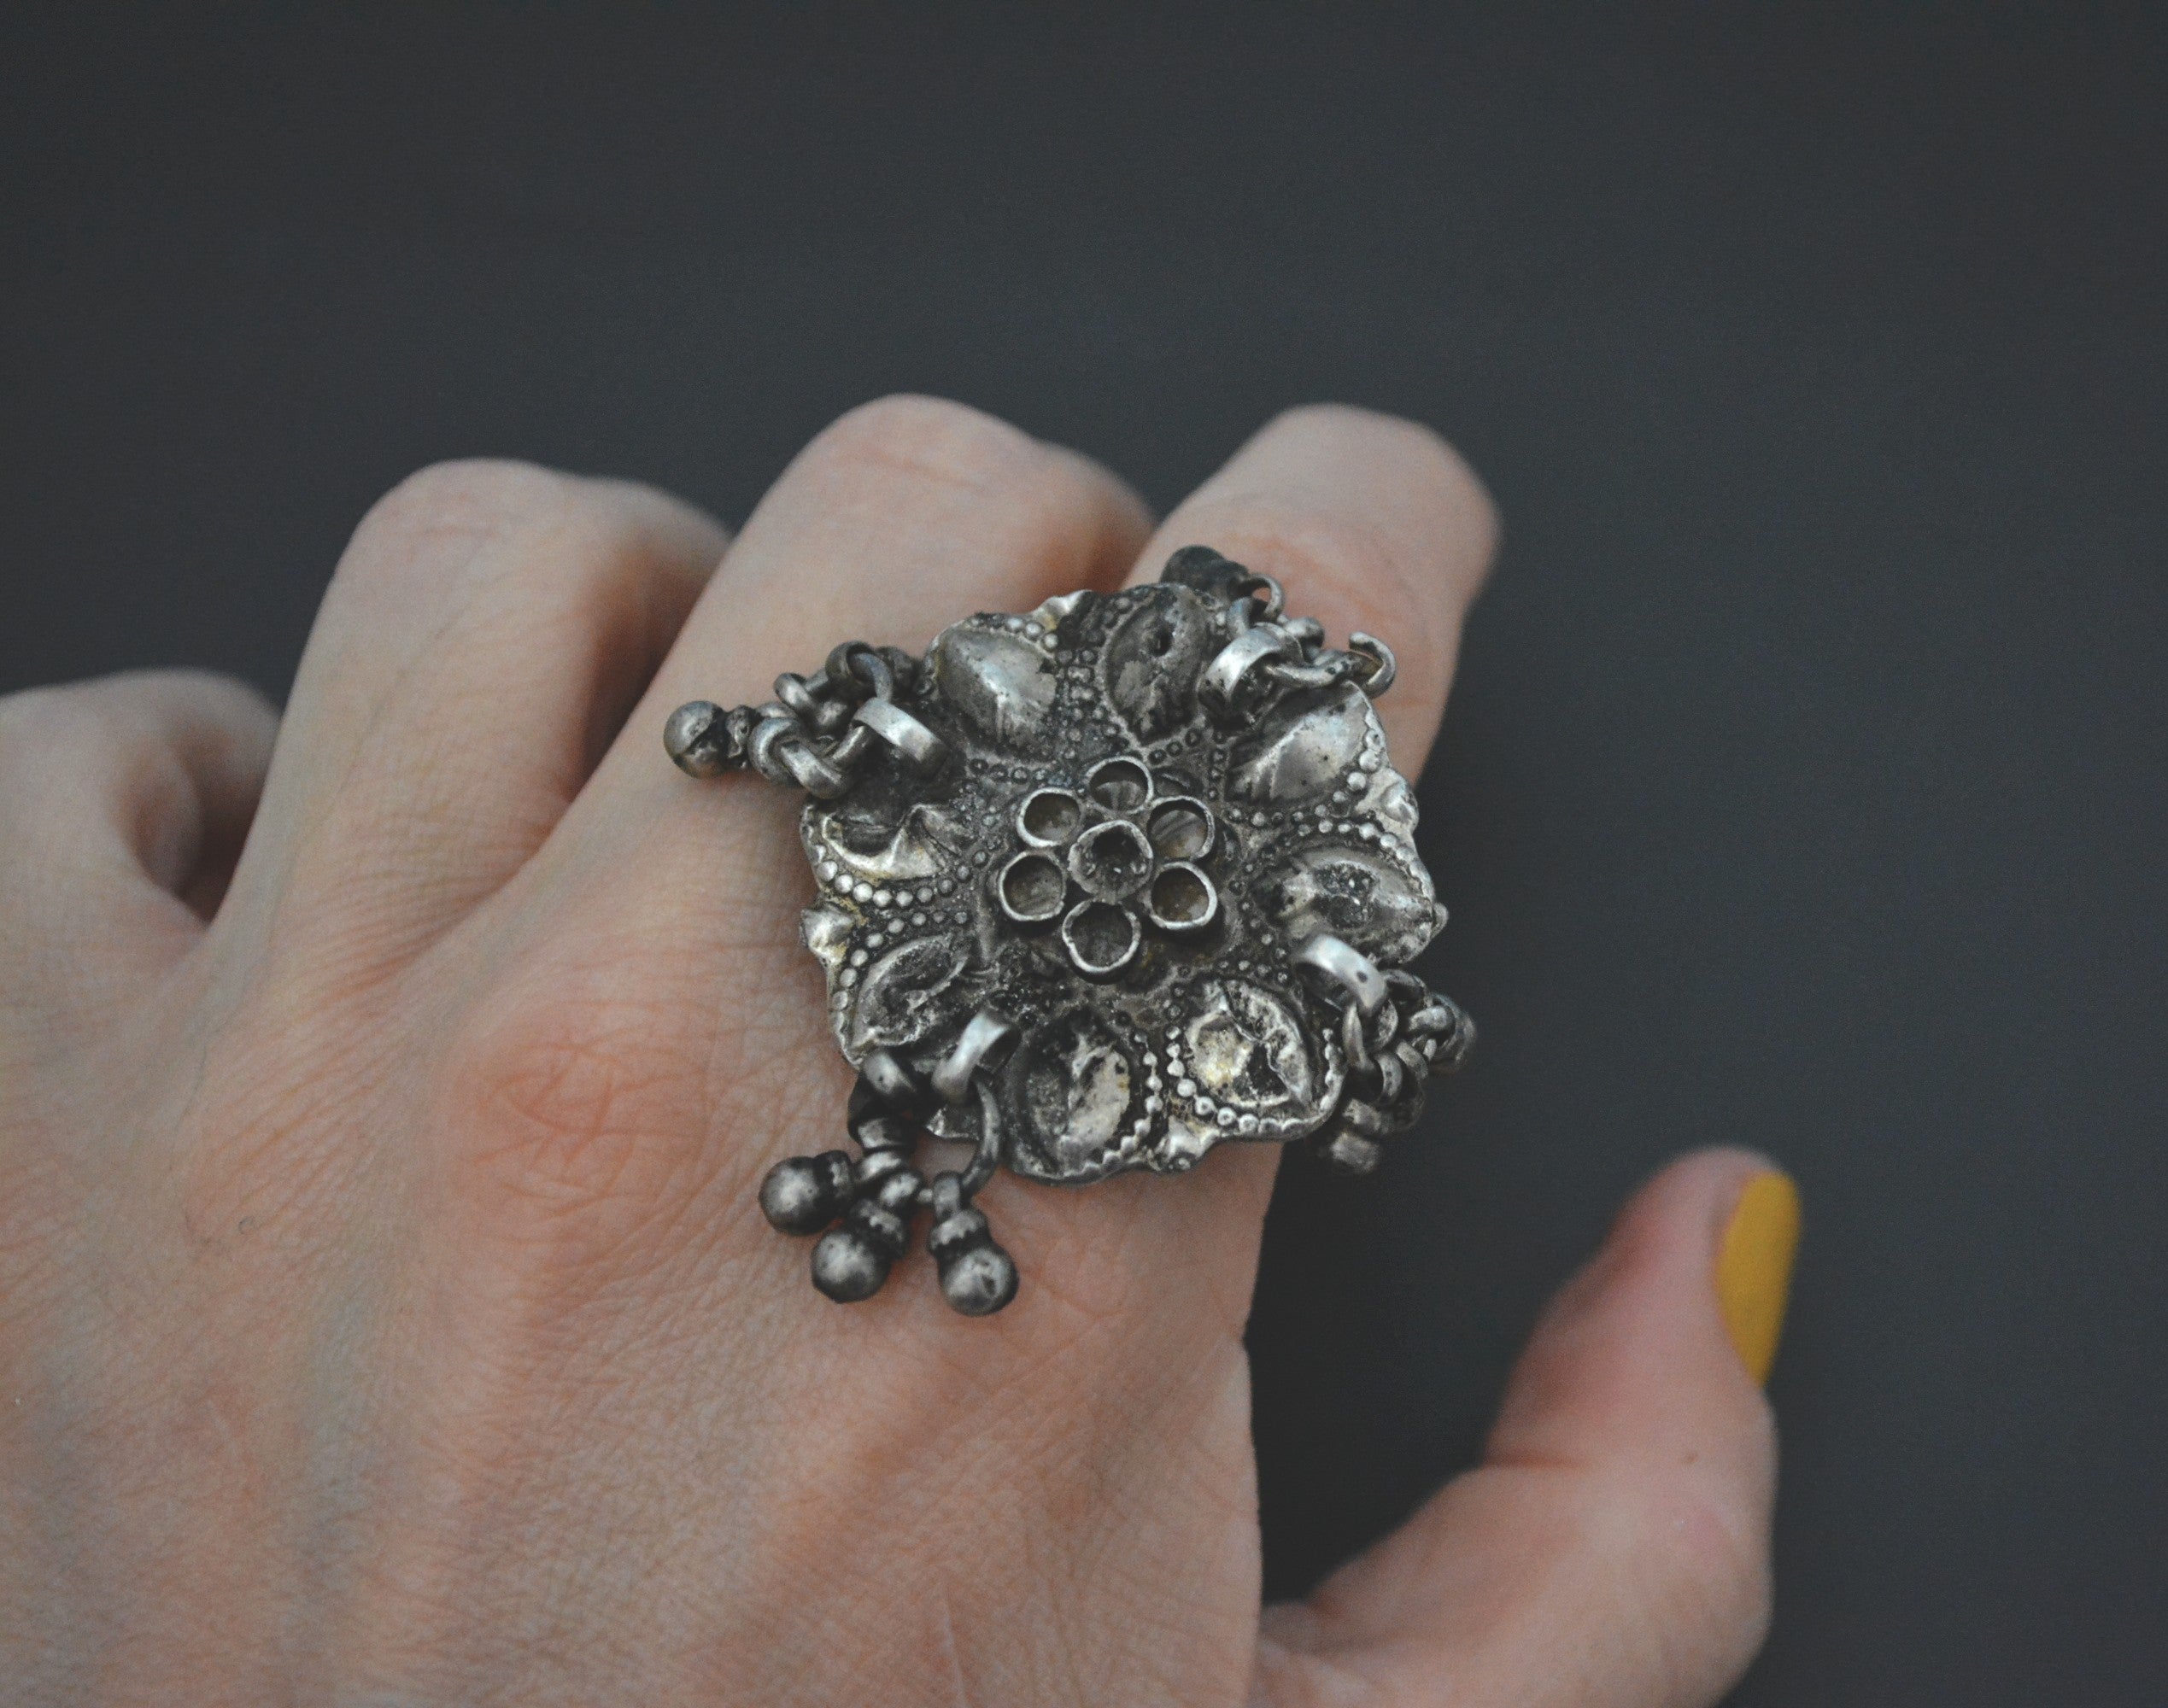 Old Rajasthani Silver Ring with Bells - Size 8.5